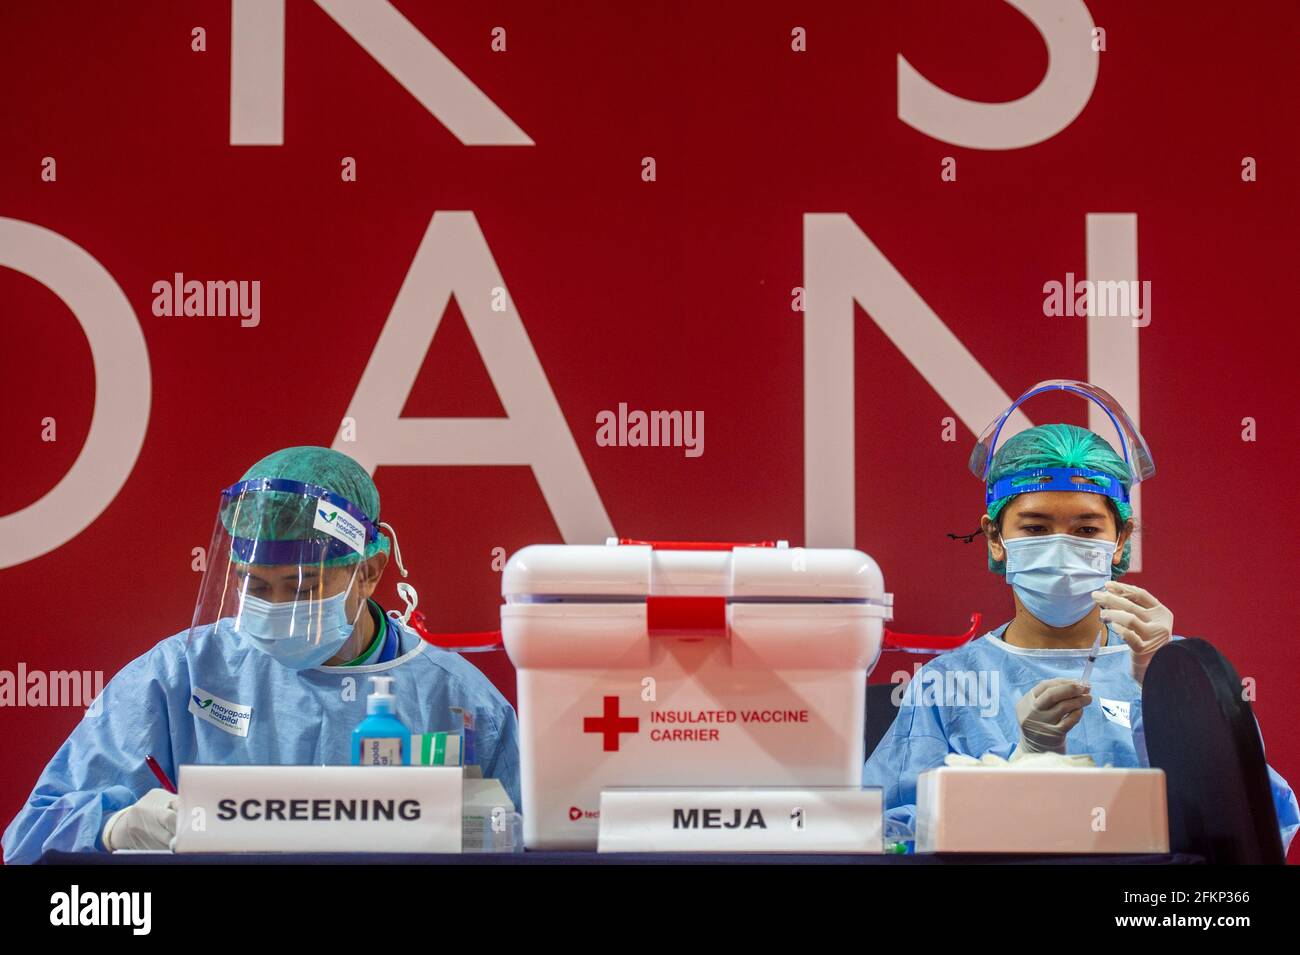 Jakarta, Indonesia. 3rd May, 2021. Medical workers prepare to get people inoculated with COVID-19 vaccines in Jakarta, Indonesia, May 3, 2021. Credit: Veri Sanovri/Xinhua/Alamy Live News Stock Photo